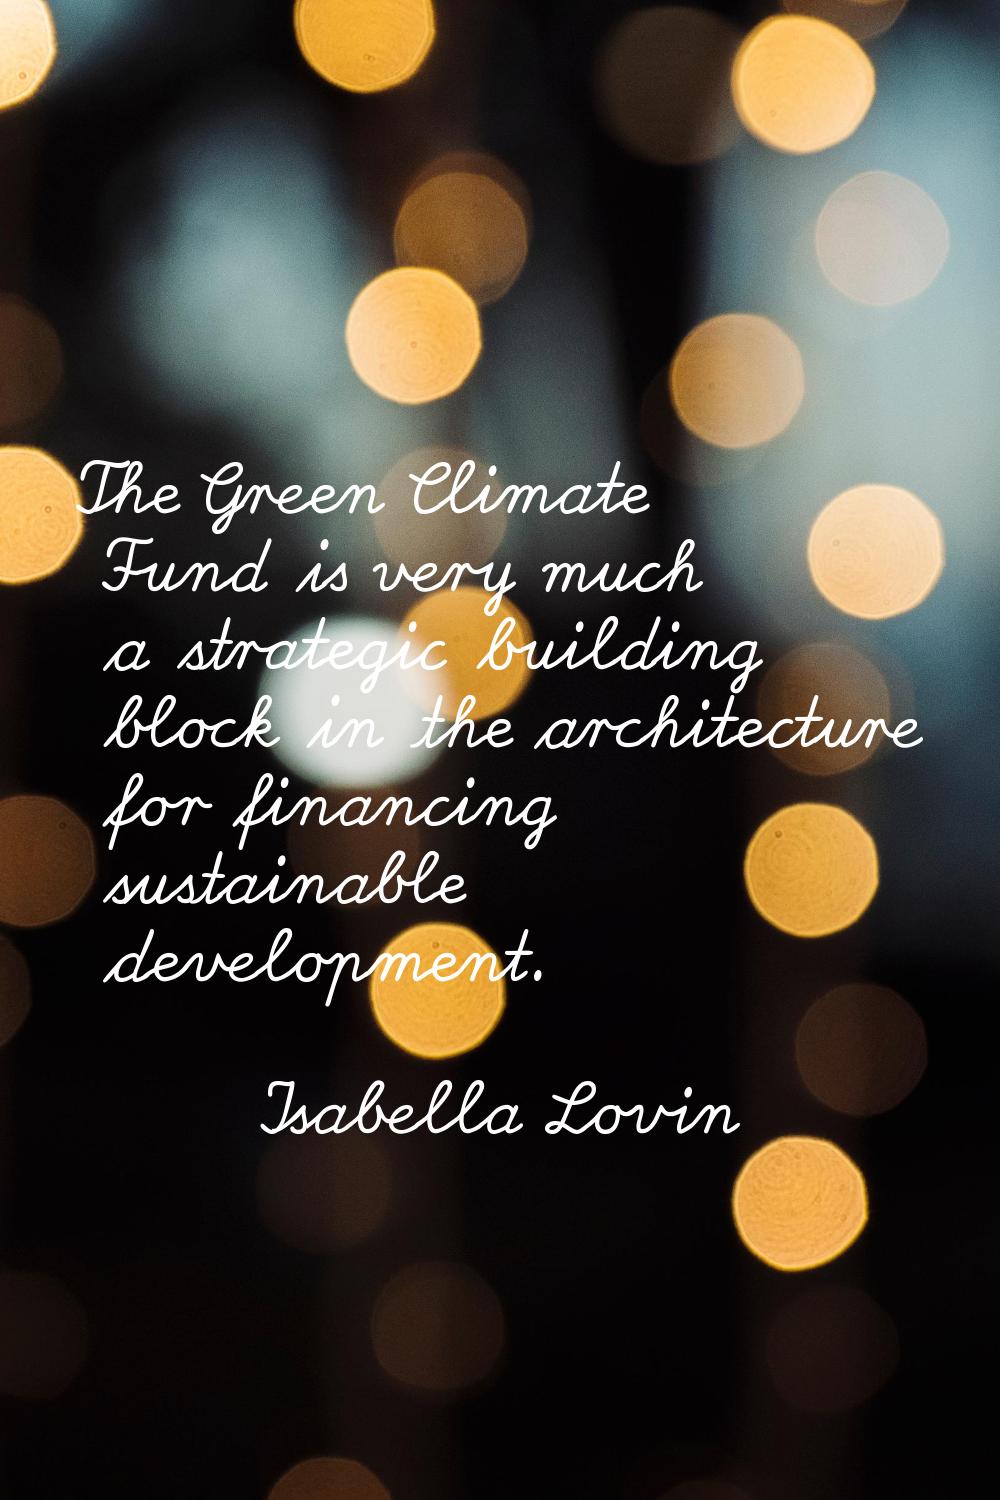 The Green Climate Fund is very much a strategic building block in the architecture for financing su